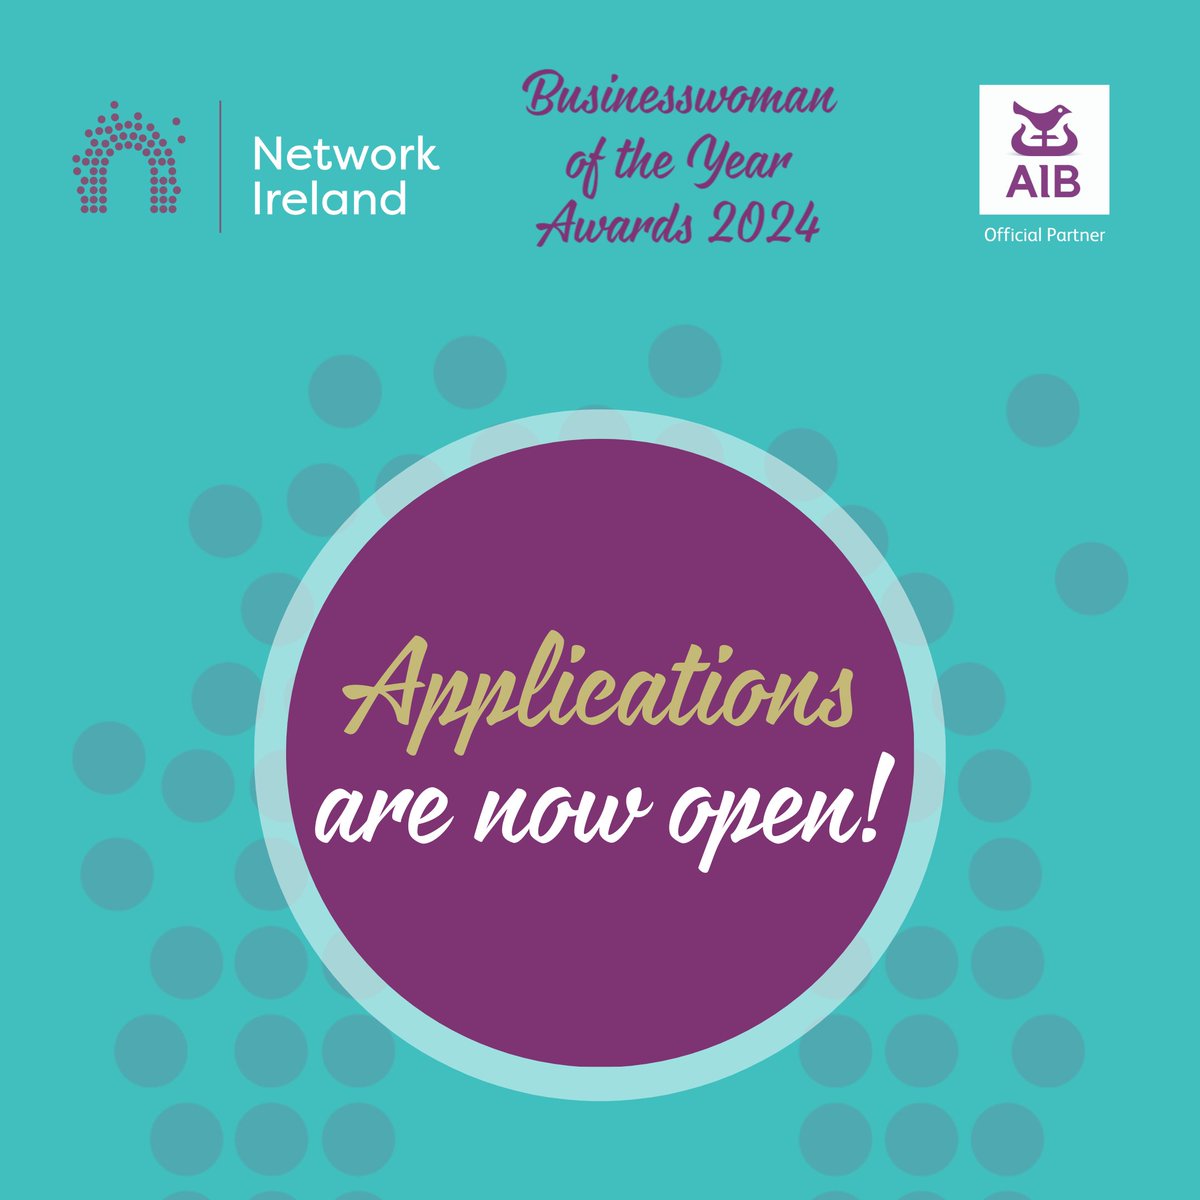 🌟 Network Ireland's 2024 Business Women of the Year Awards are open! Celebrating professional women across sectors with 8 diverse categories. A chance to reflect & grow professionally 🚀 Apply now: networkireland.ie/page/Businessw… #NetworkIreland #NetworkIrelandCork #supportedbyAIB